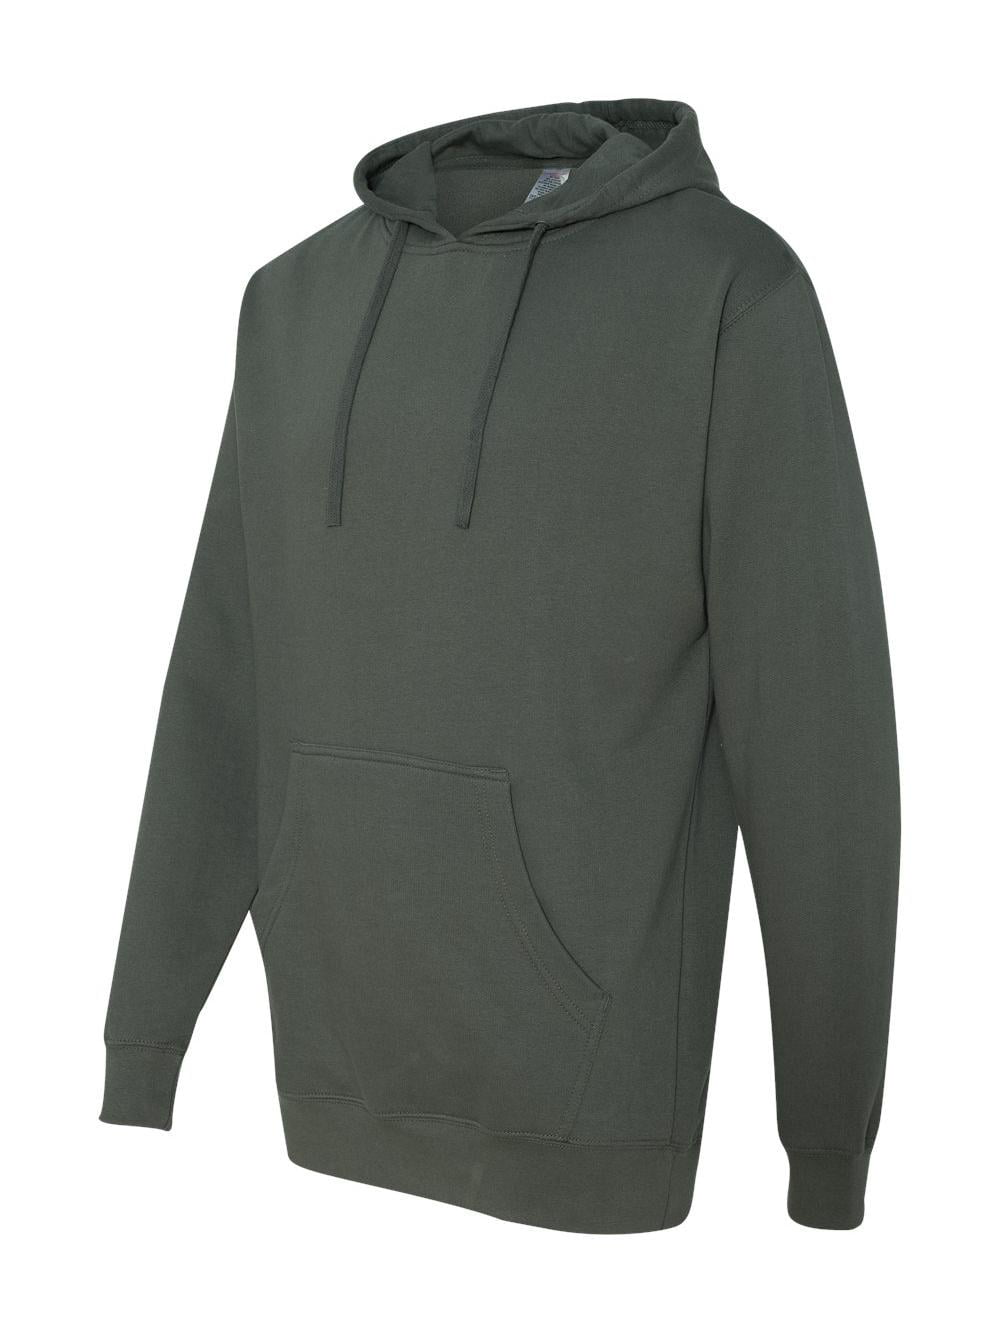 Independent Trading Co. - Midweight Hooded Sweatshirt - SS4500 ...